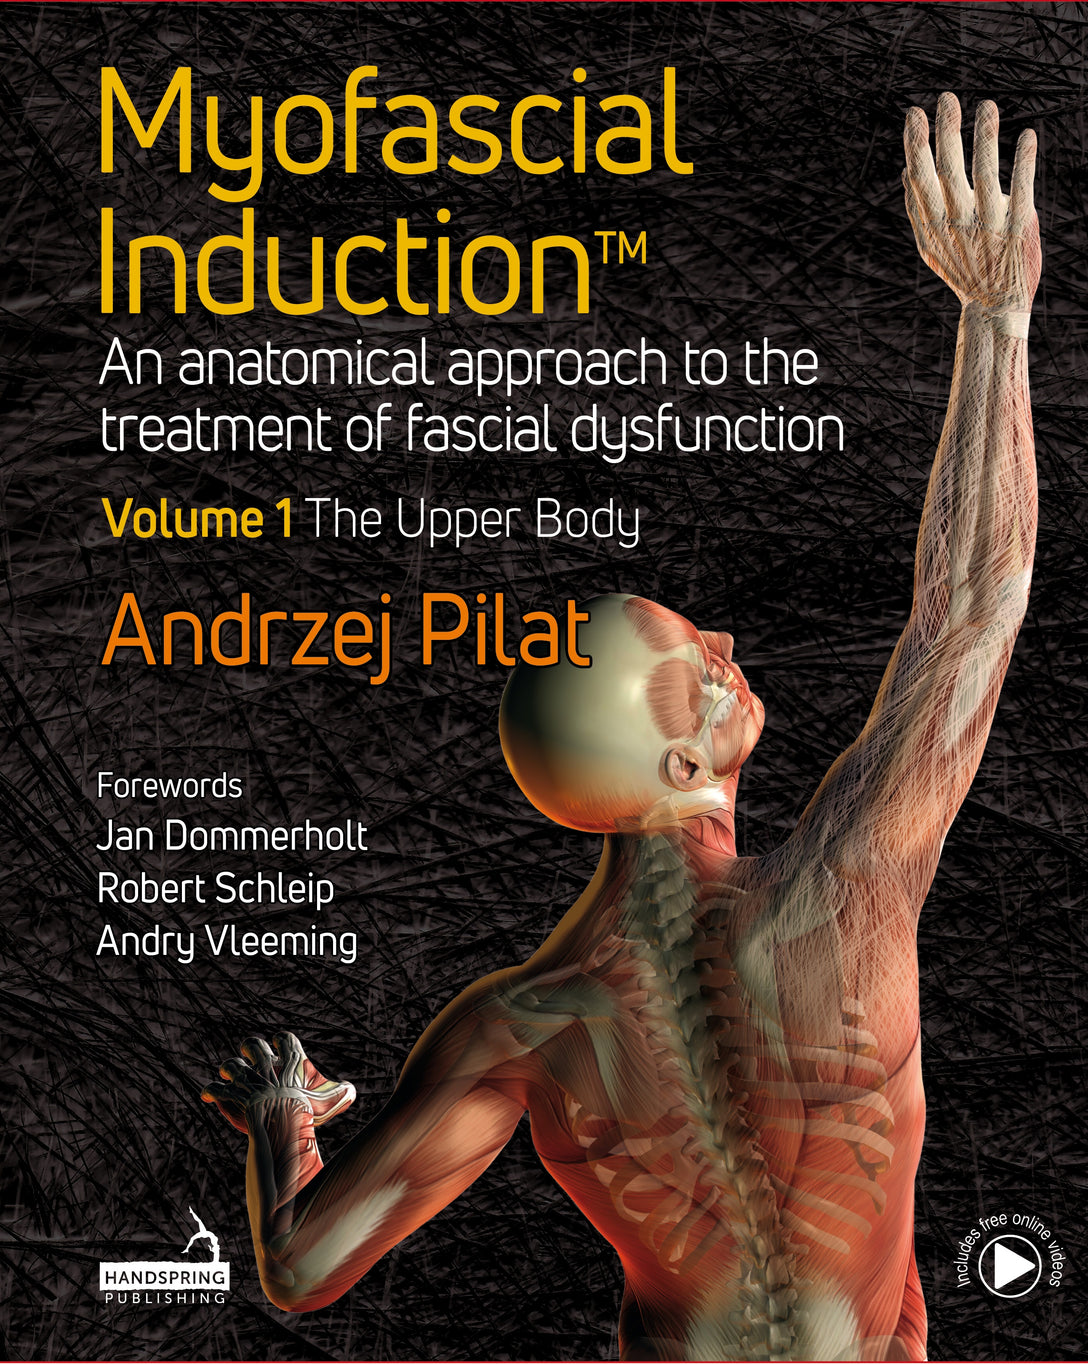 Myofascial Induction™ Volume 1: The Upper Body by Andrzej Pilat